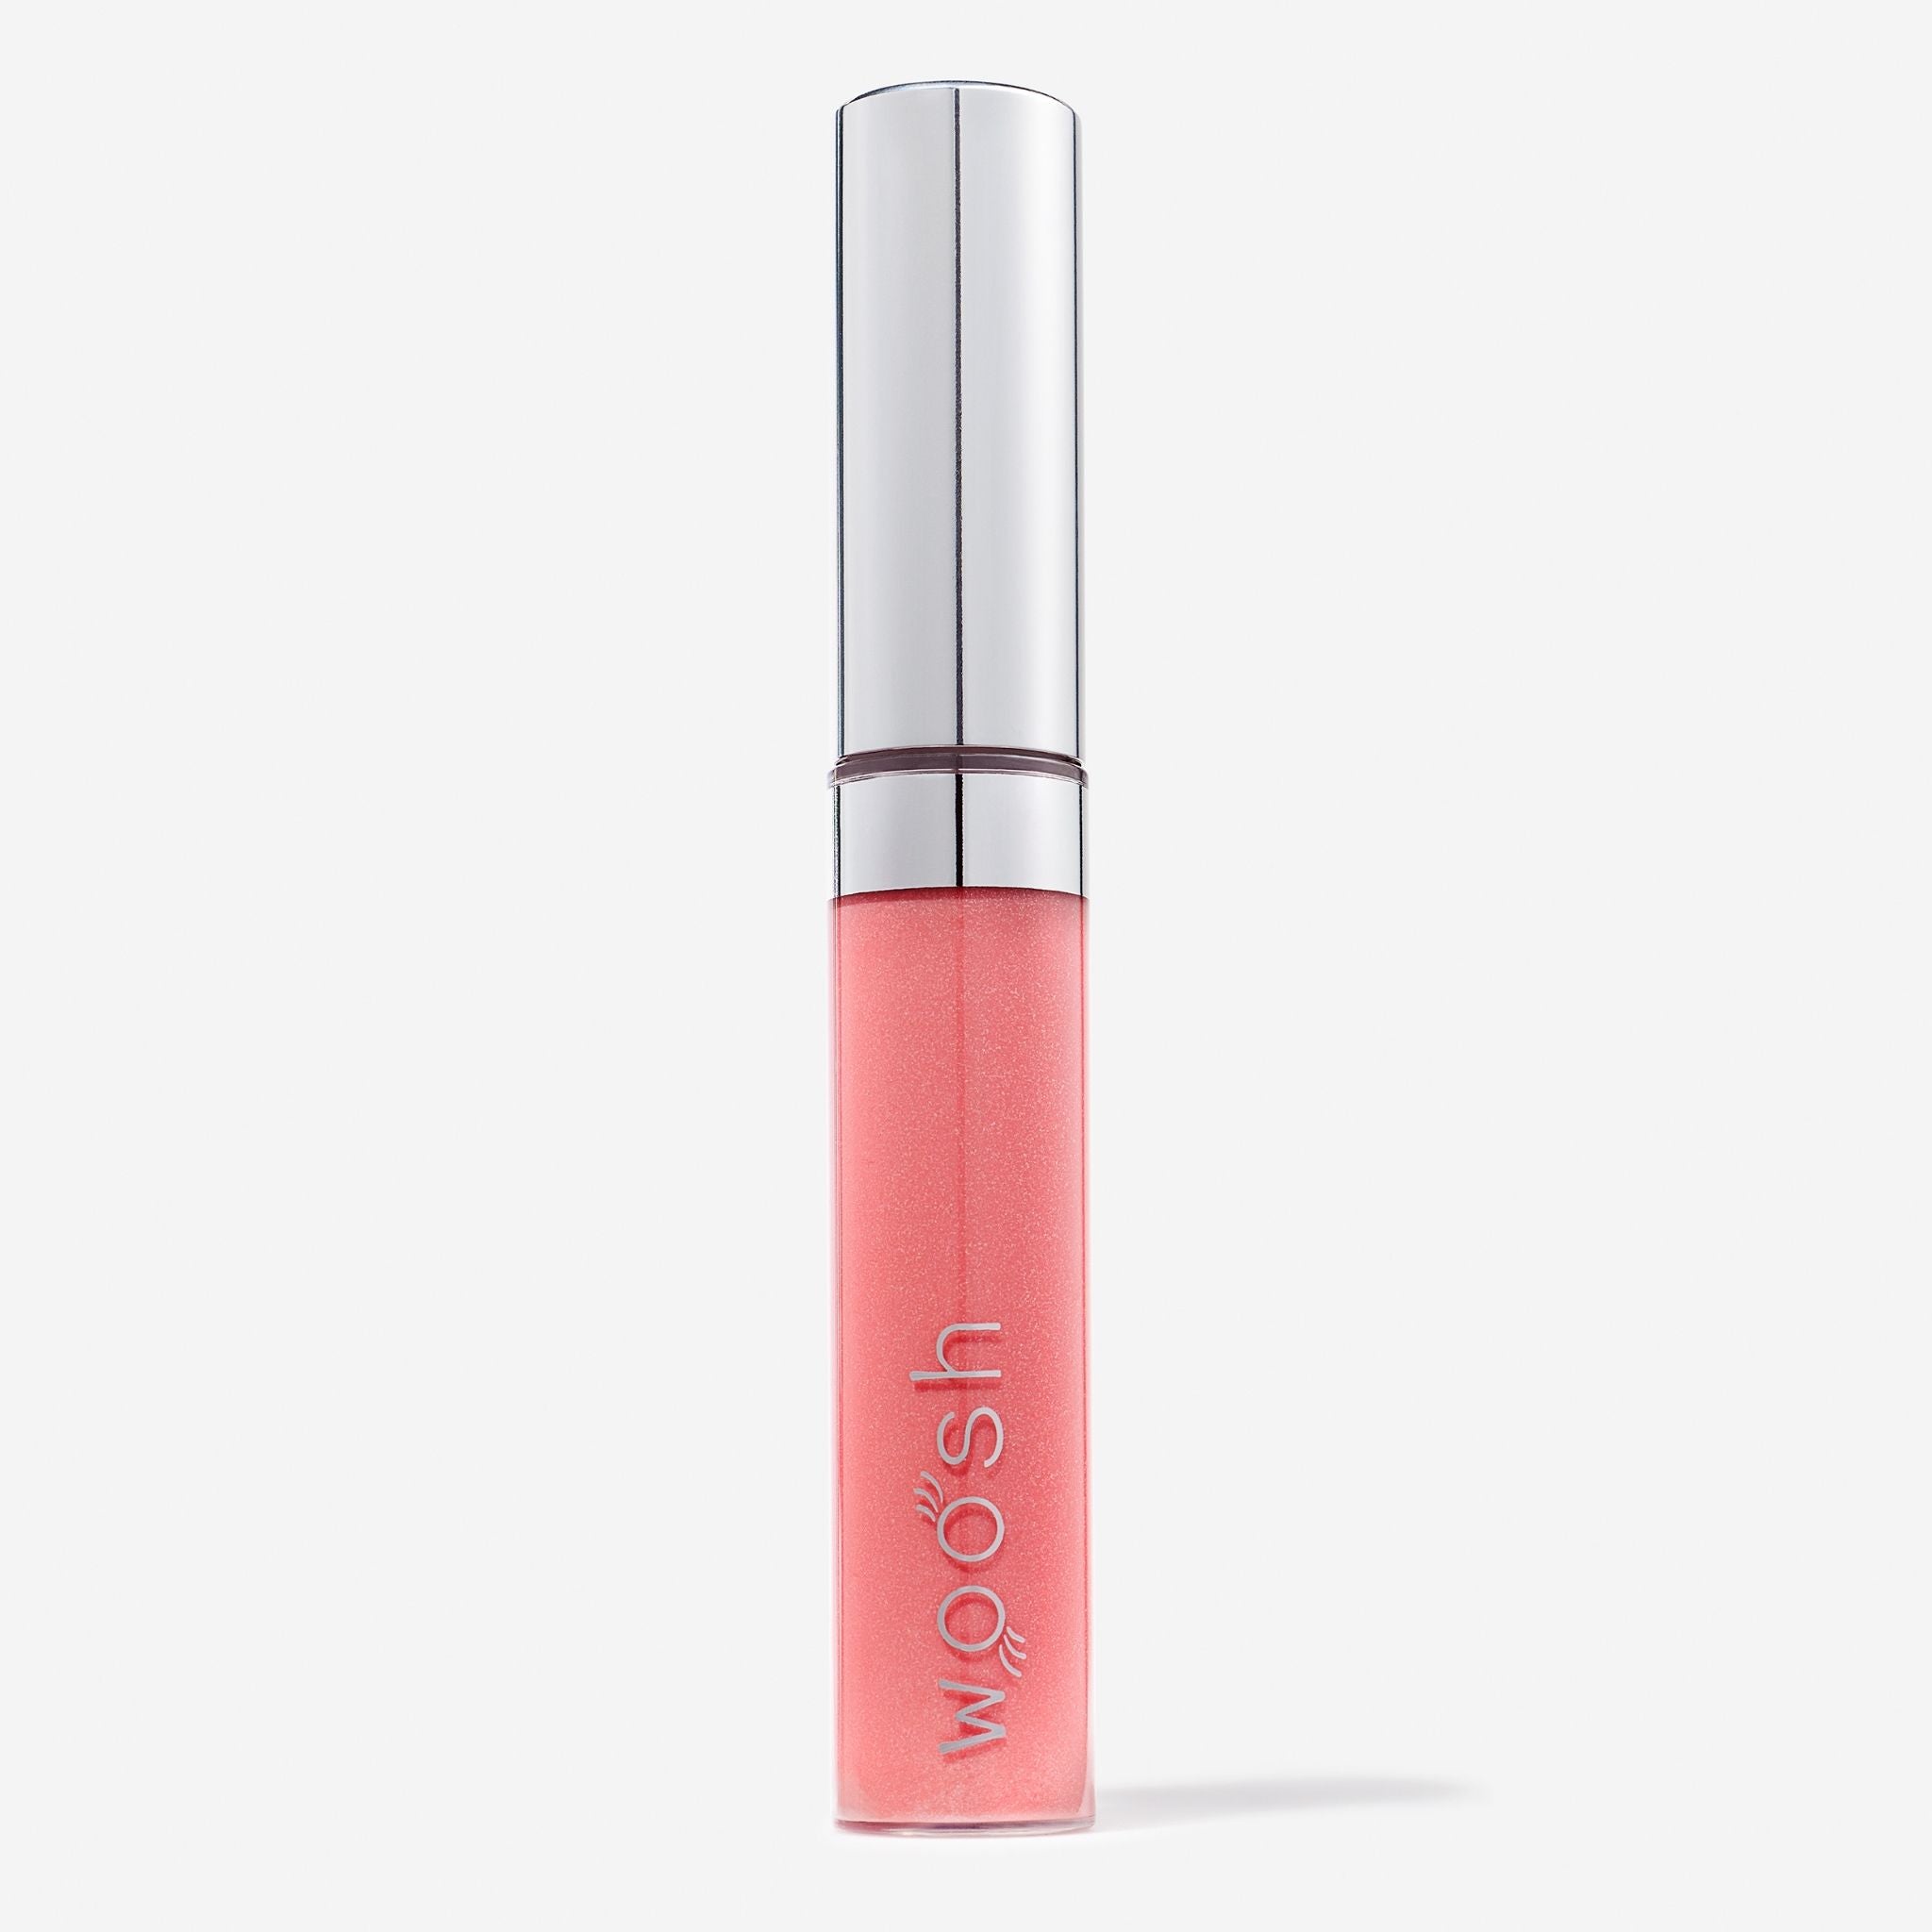 Vegan, moisturizing, shea butter, hyaluronic acid, Glam Peach / Glimmer spin on lip gloss by Woosh Beauty with shimmer